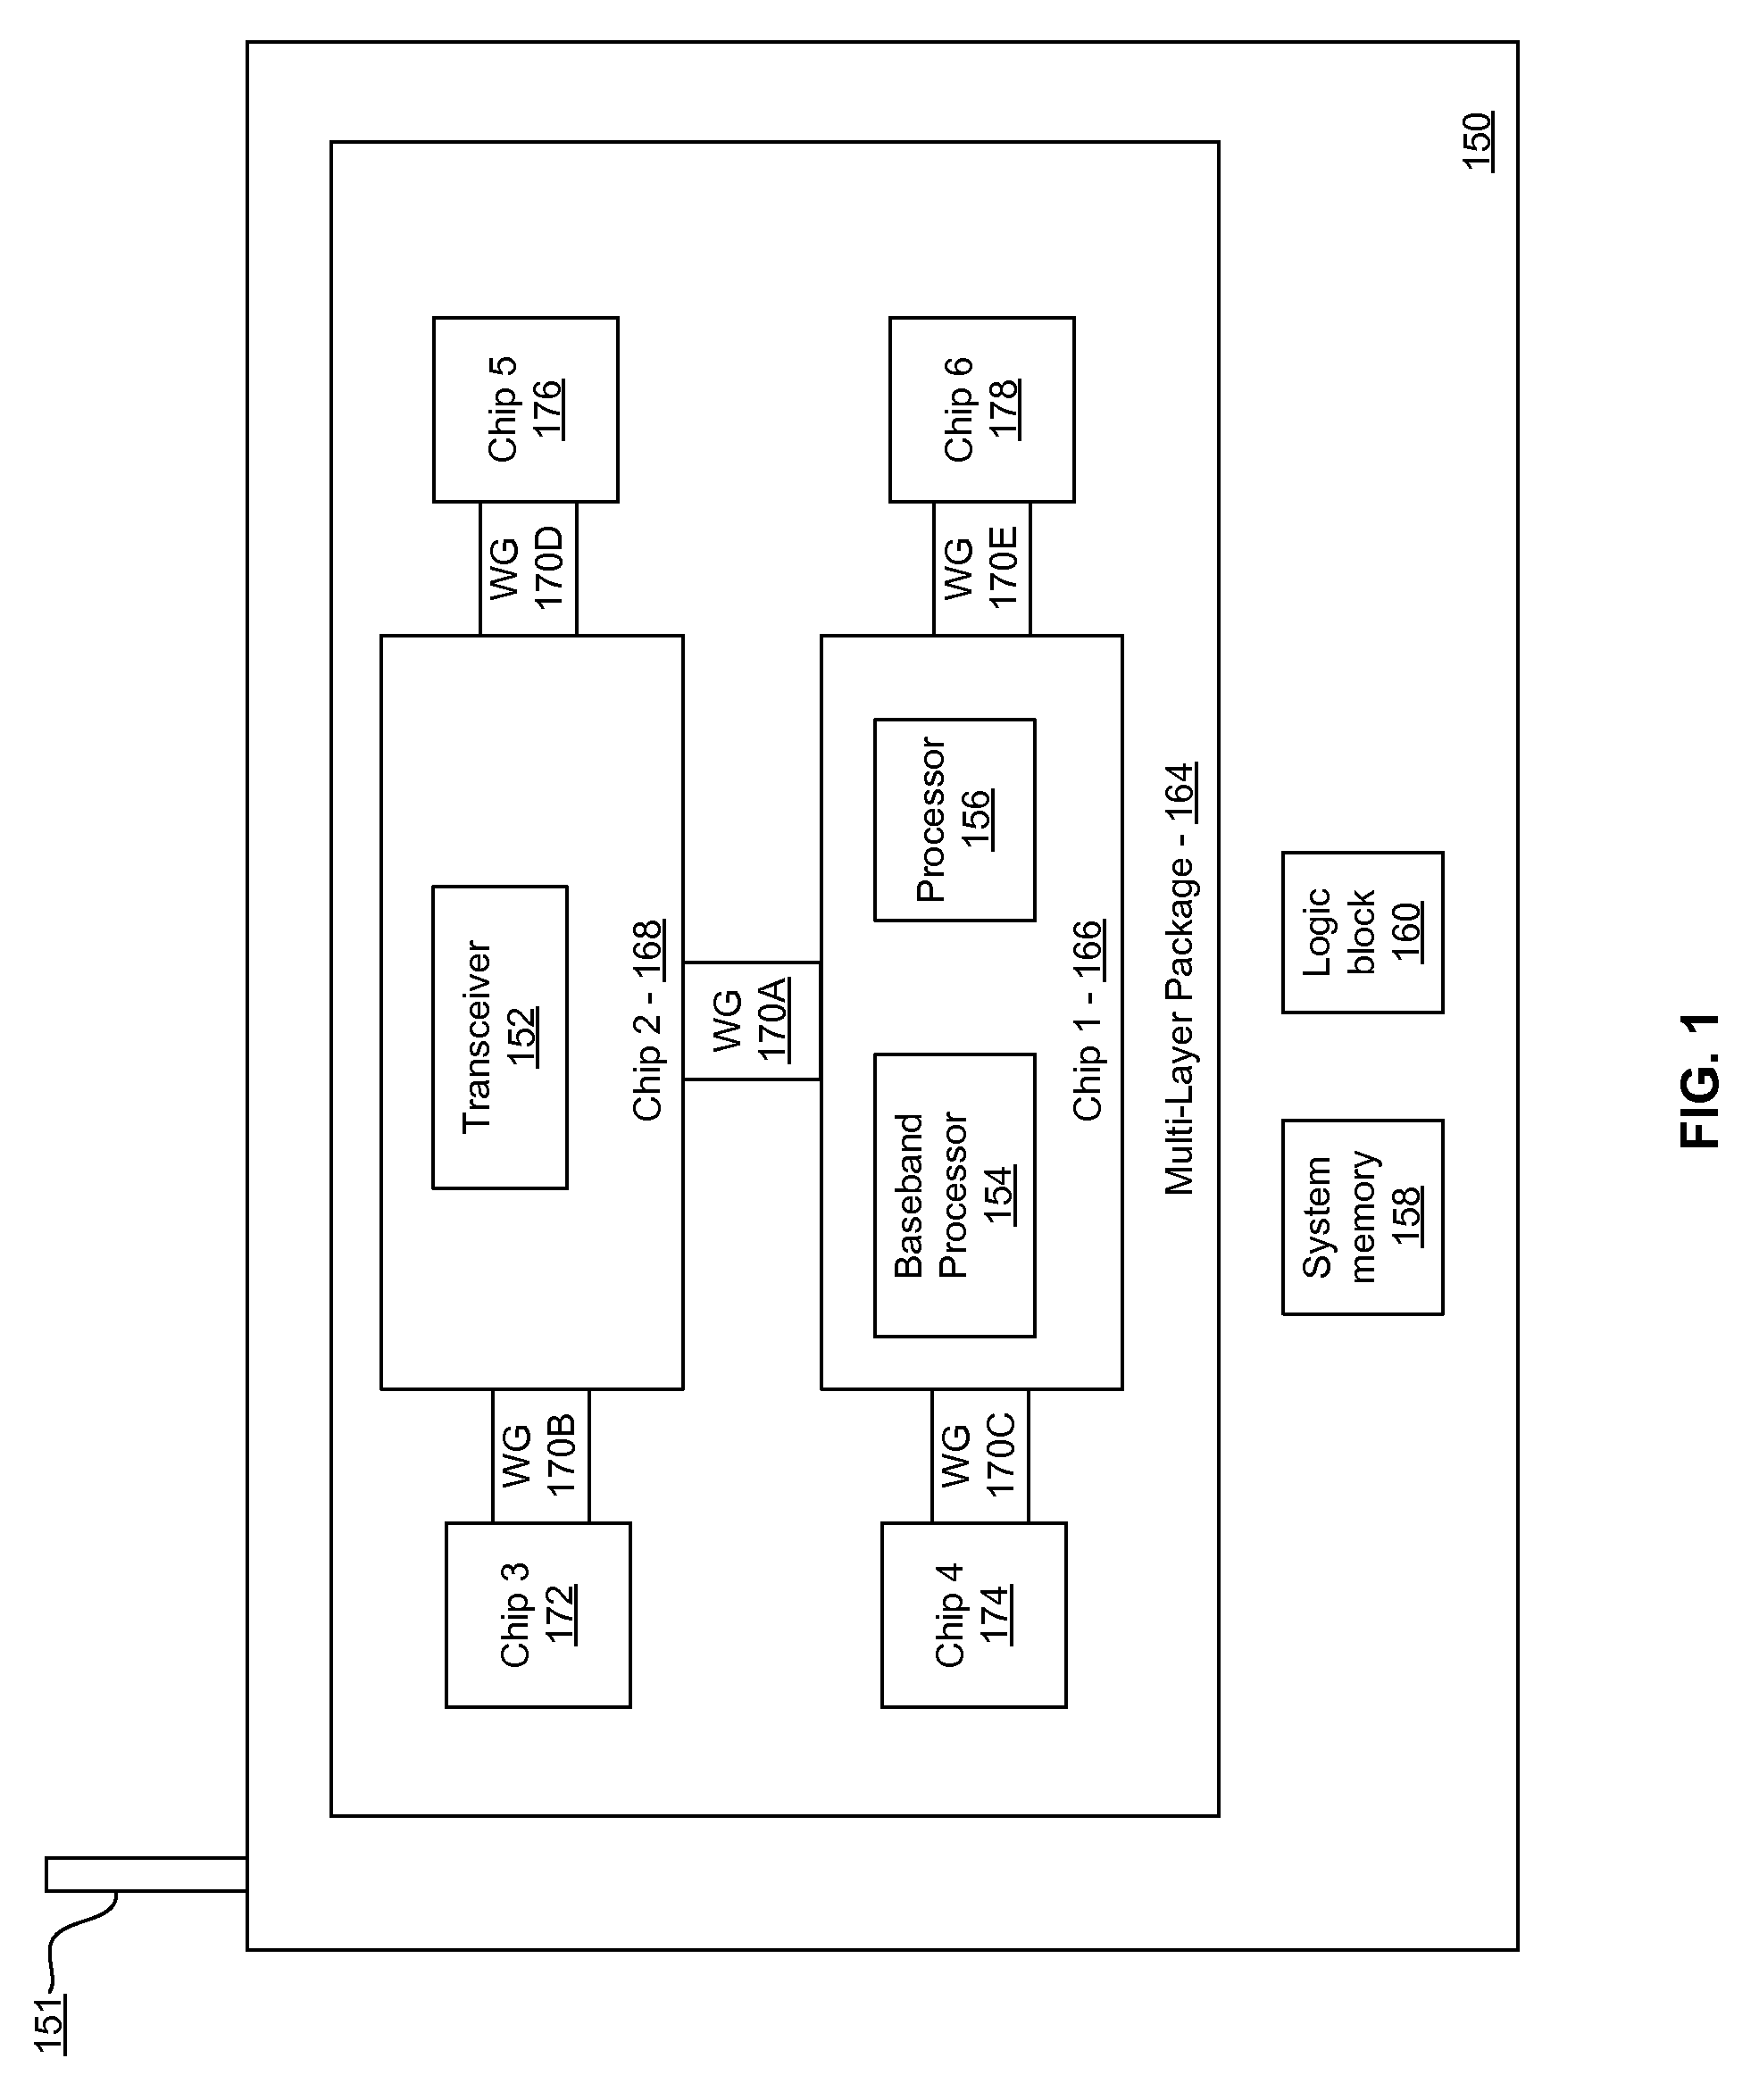 Method and system for inter-chip communication via integrated circuit package waveguides